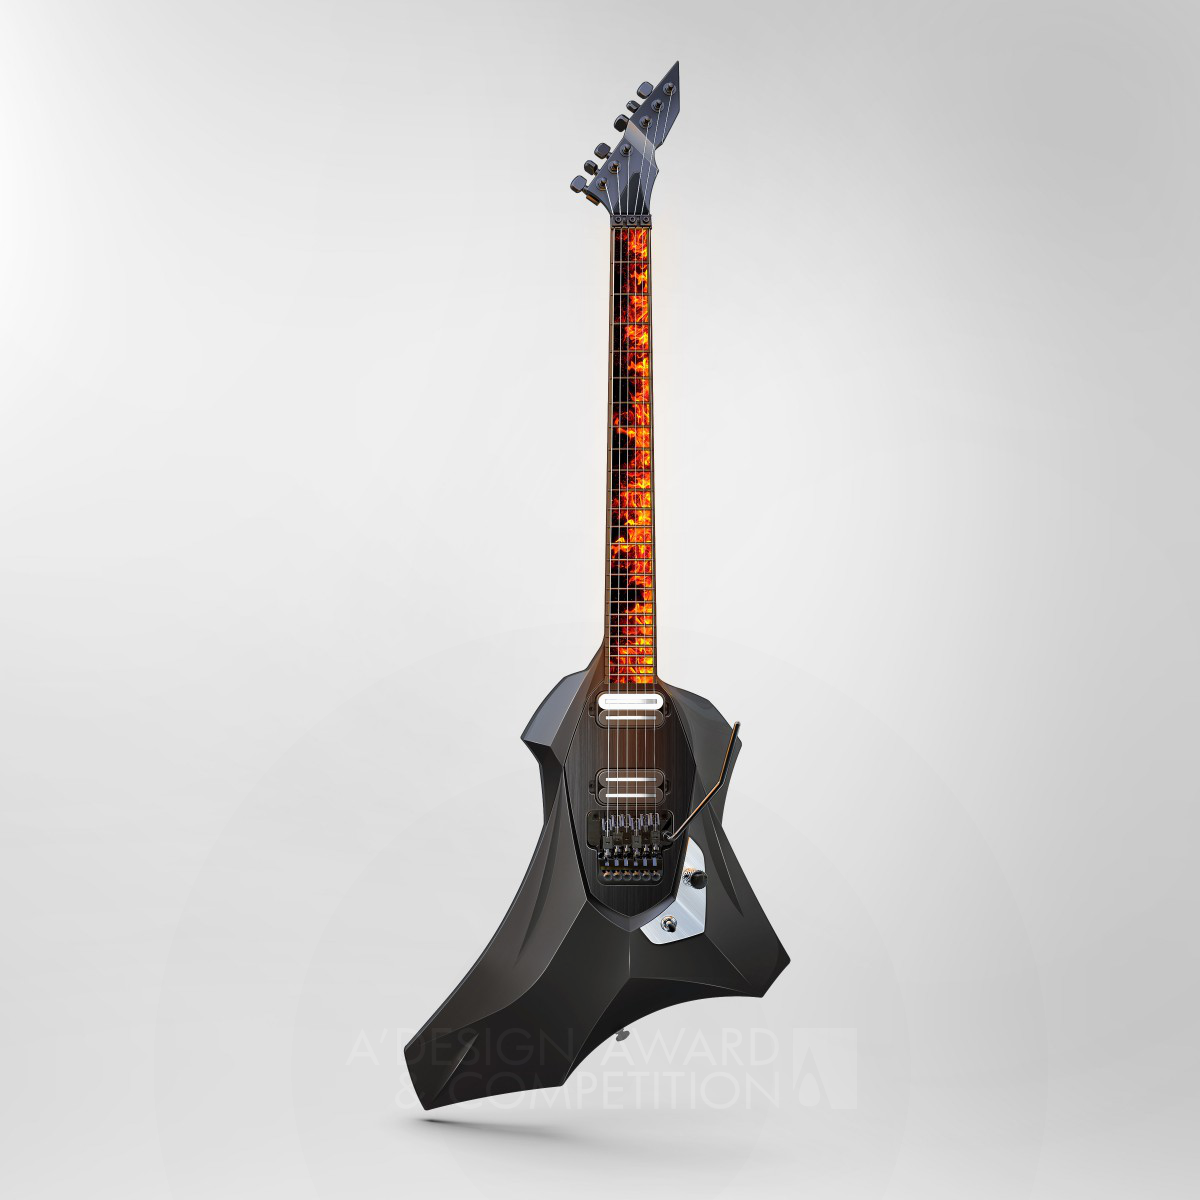 Pouladvar wins Silver at the prestigious A' Musical Instruments Design Award with Black Hole Multifunctional Guitar.